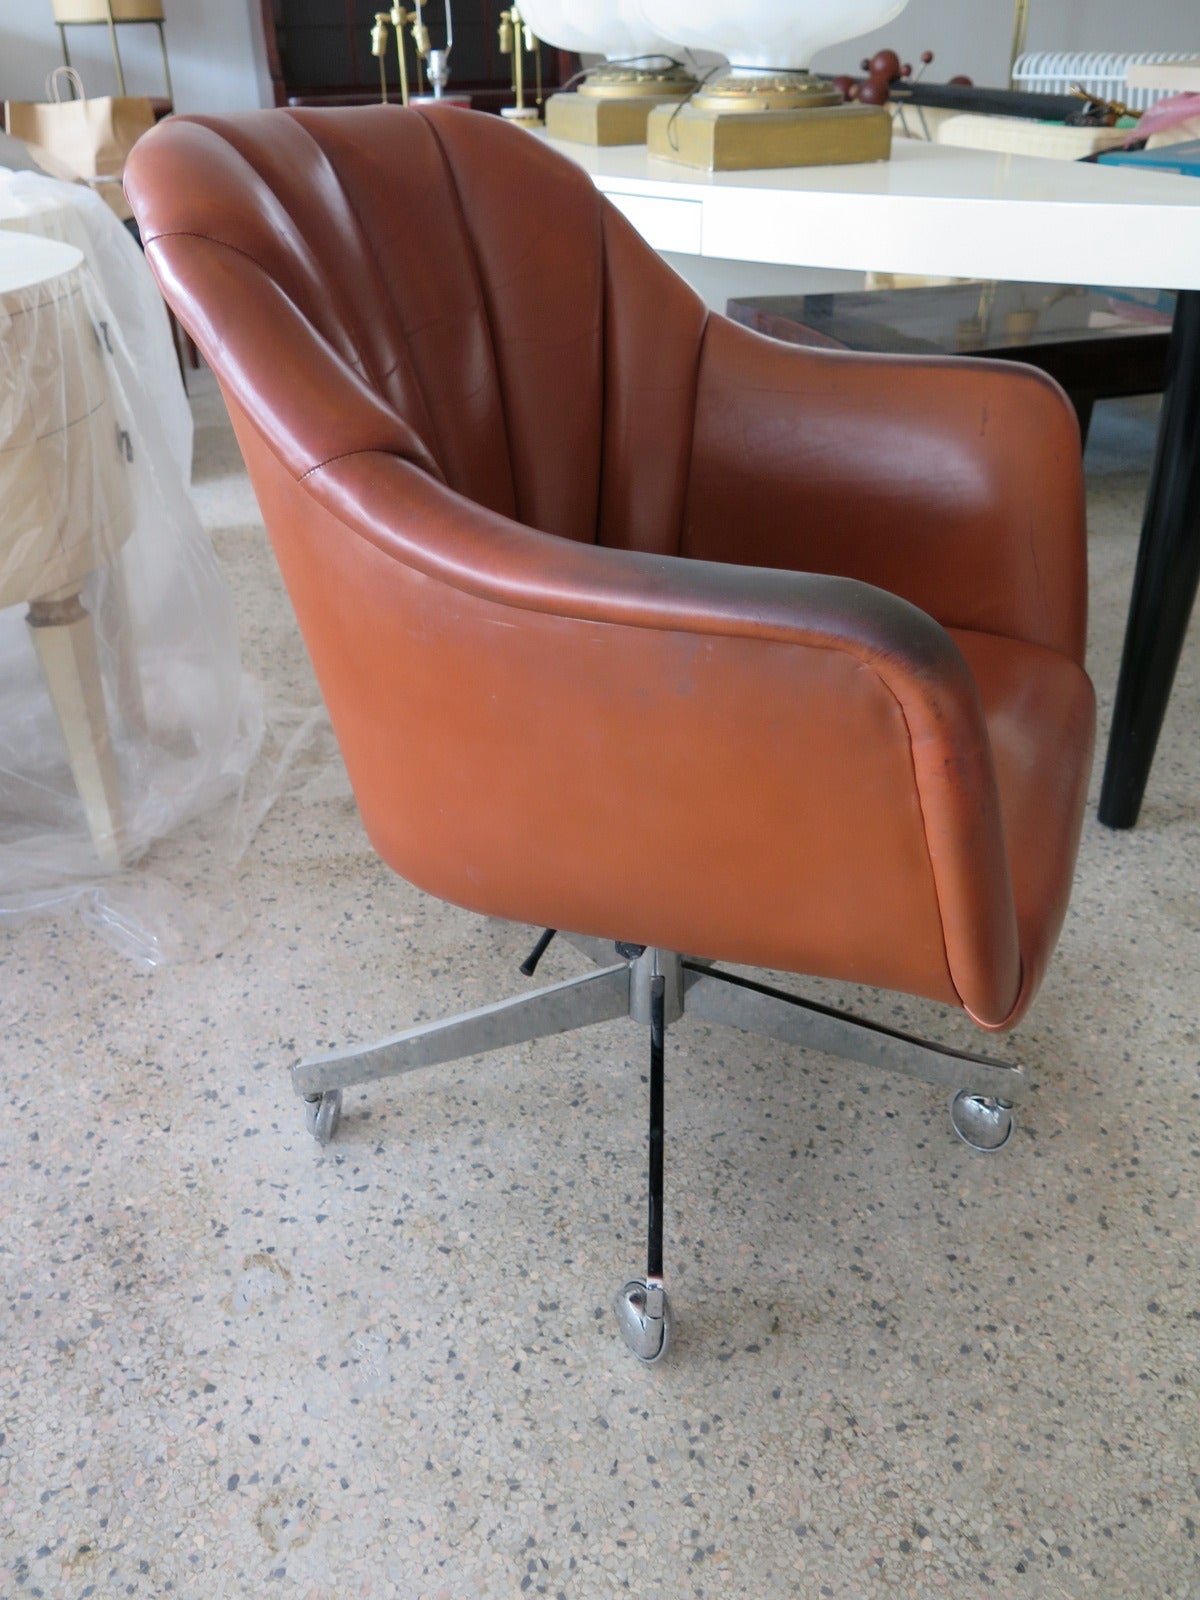 An office or desk chair by Ward Bennett for Brickell. Original brown leather, swivel and tilt. Stainless base with casters.